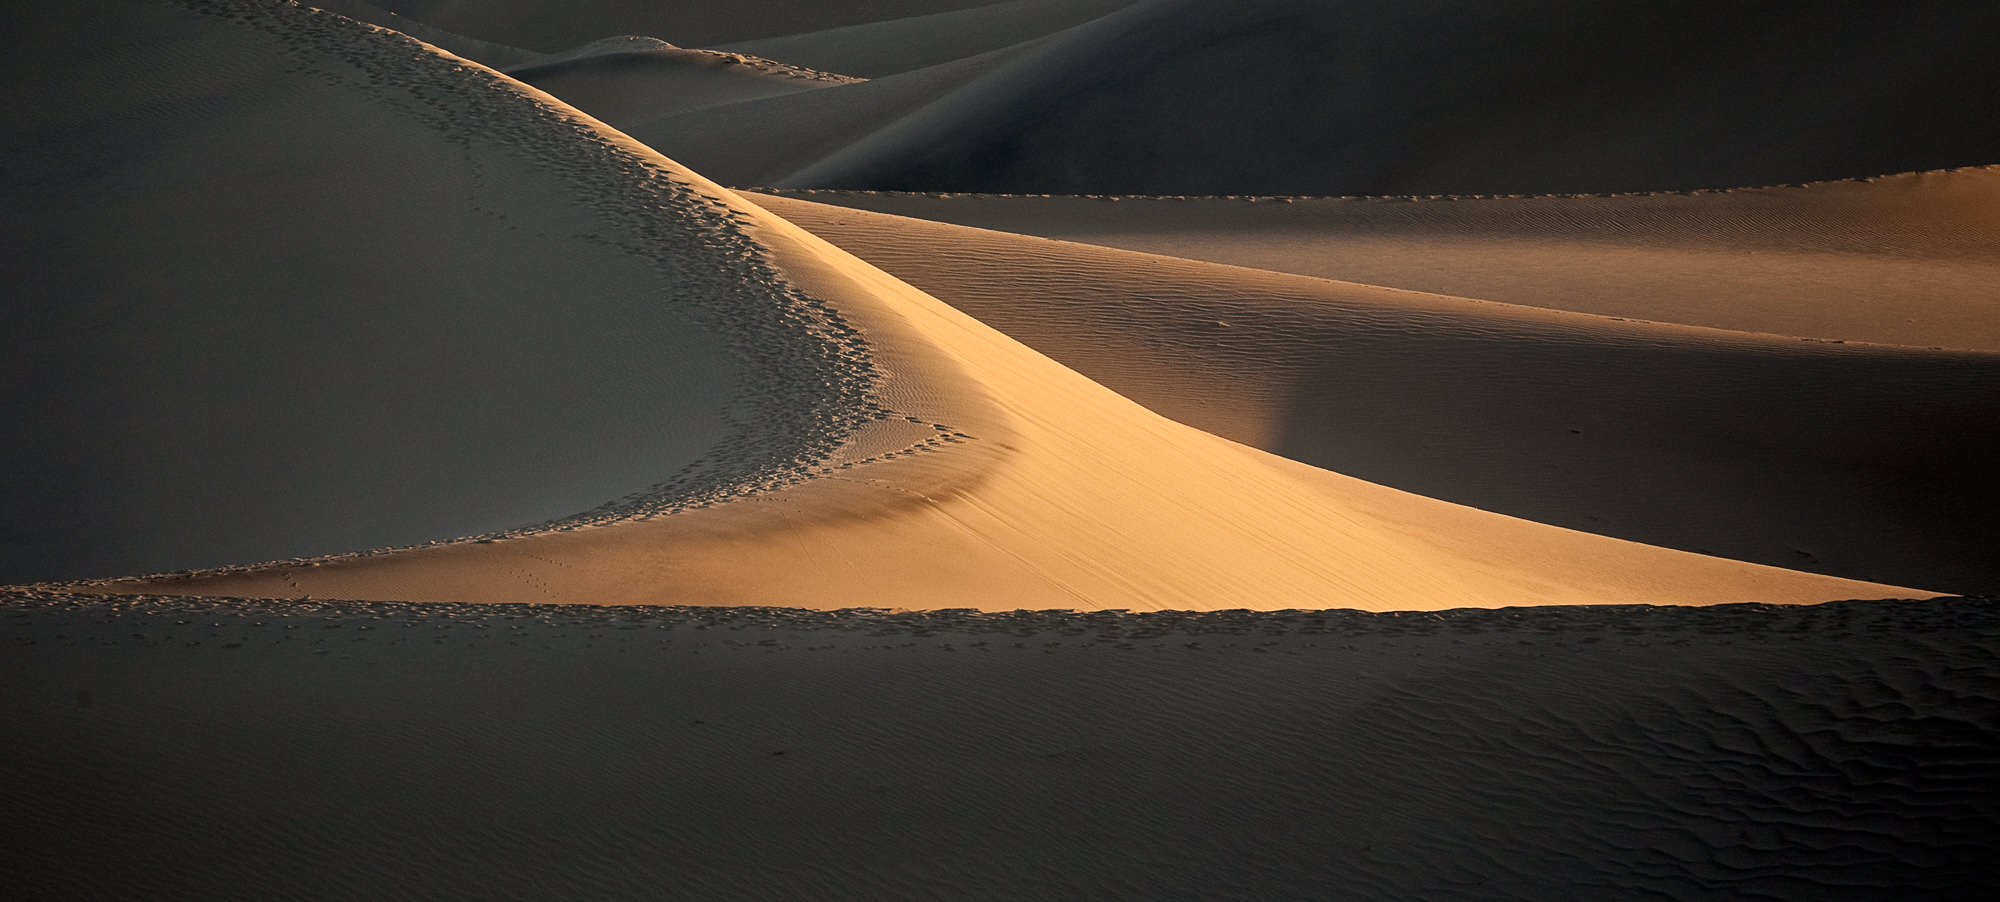 Early morning light brings out the curving lines in the dunes.